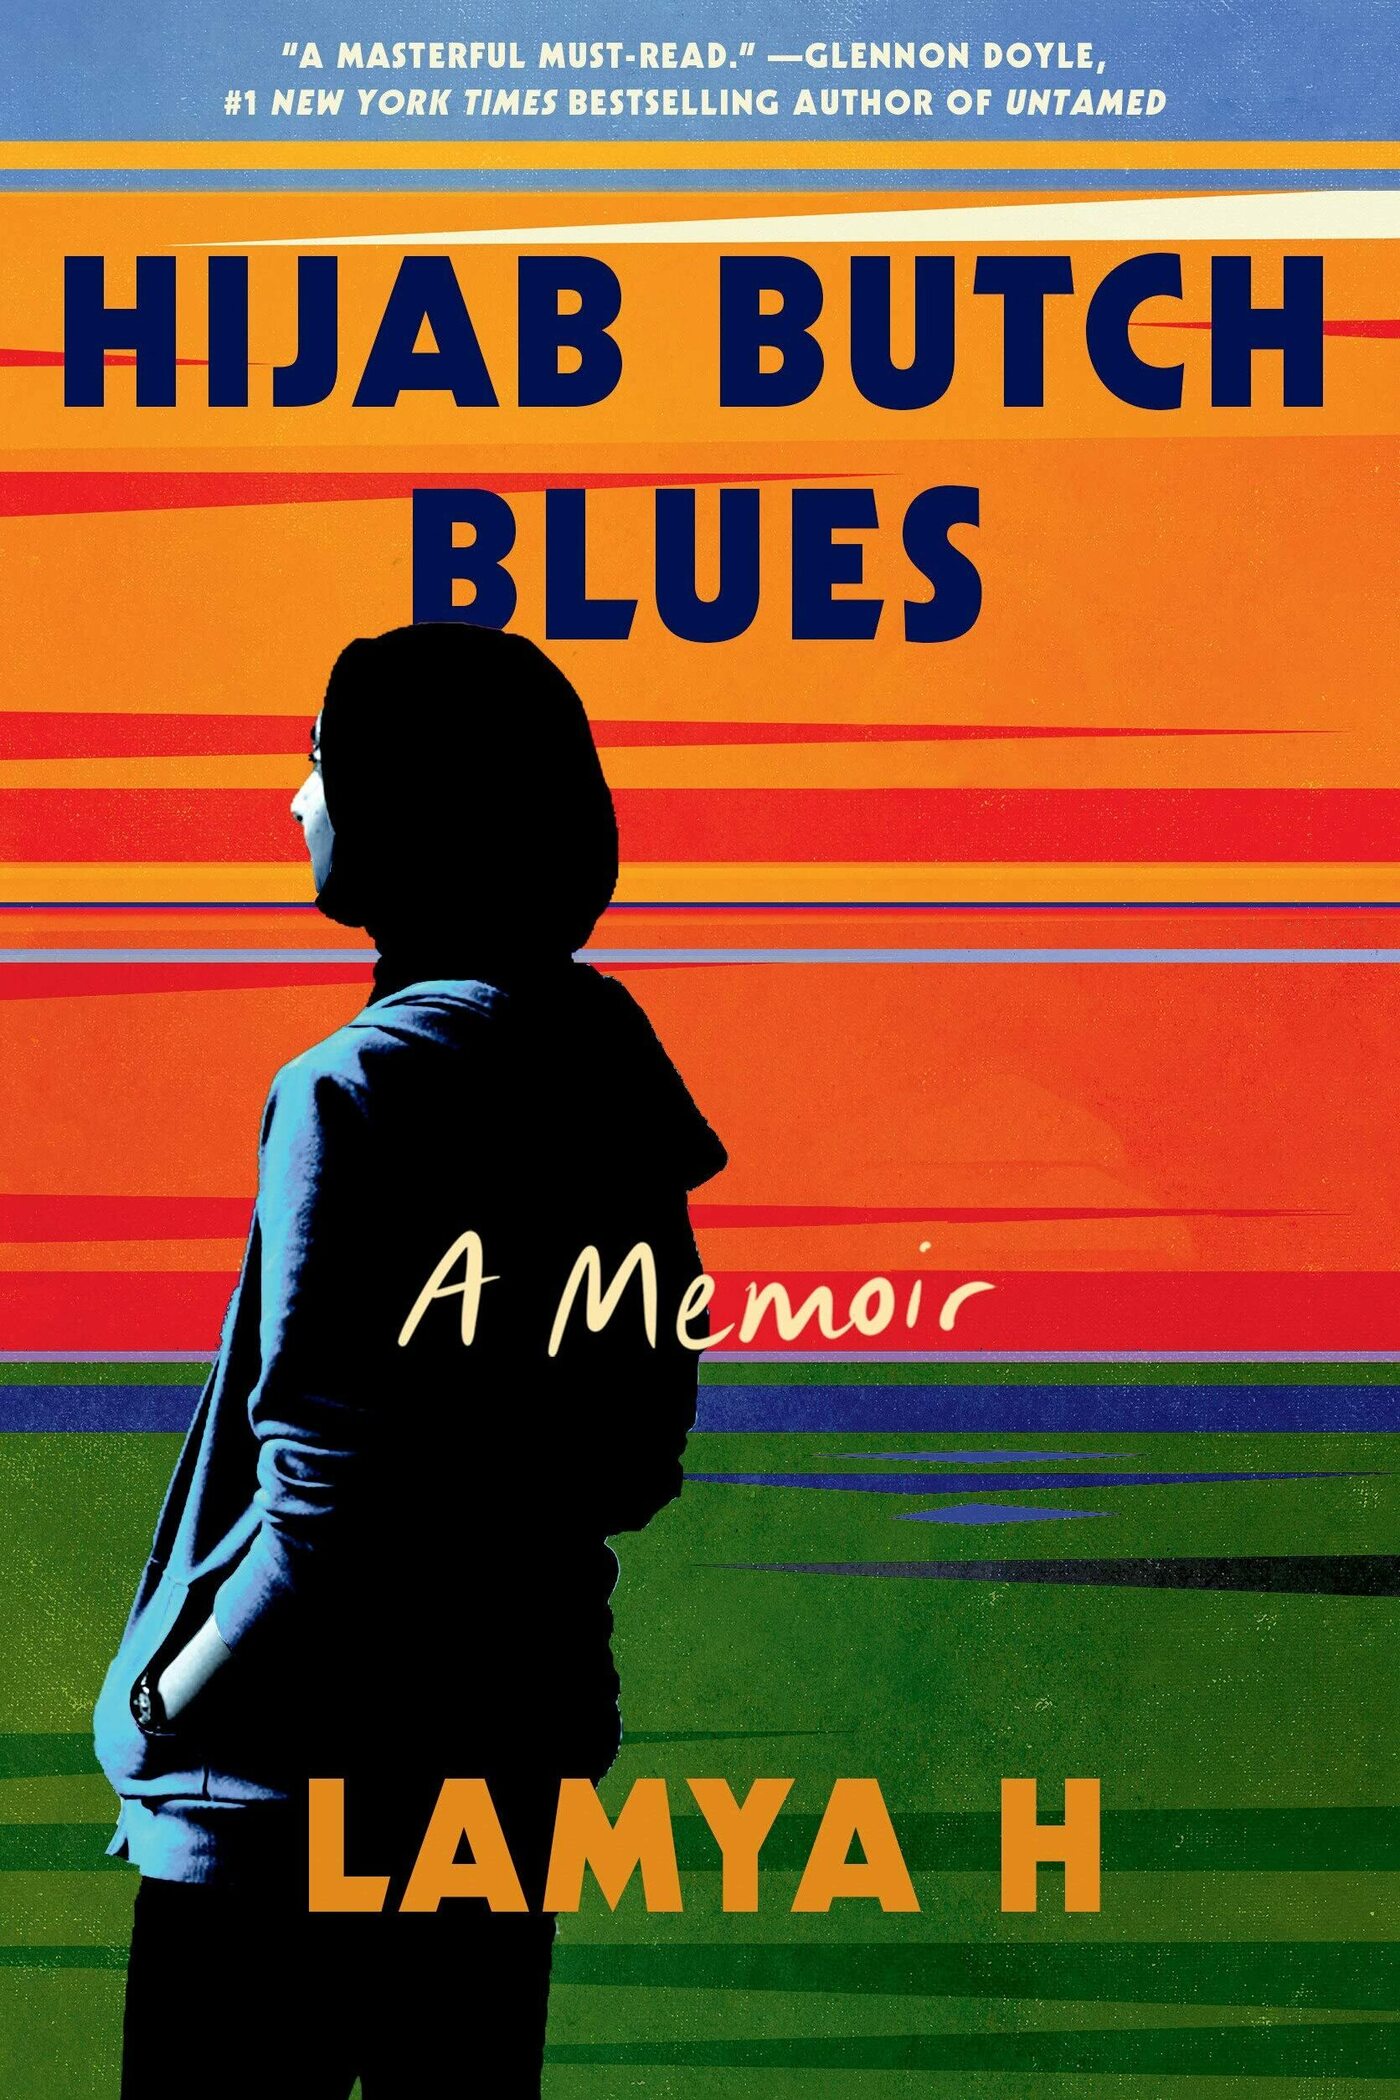 book cover for Hijab Butch Blues by Lamya H